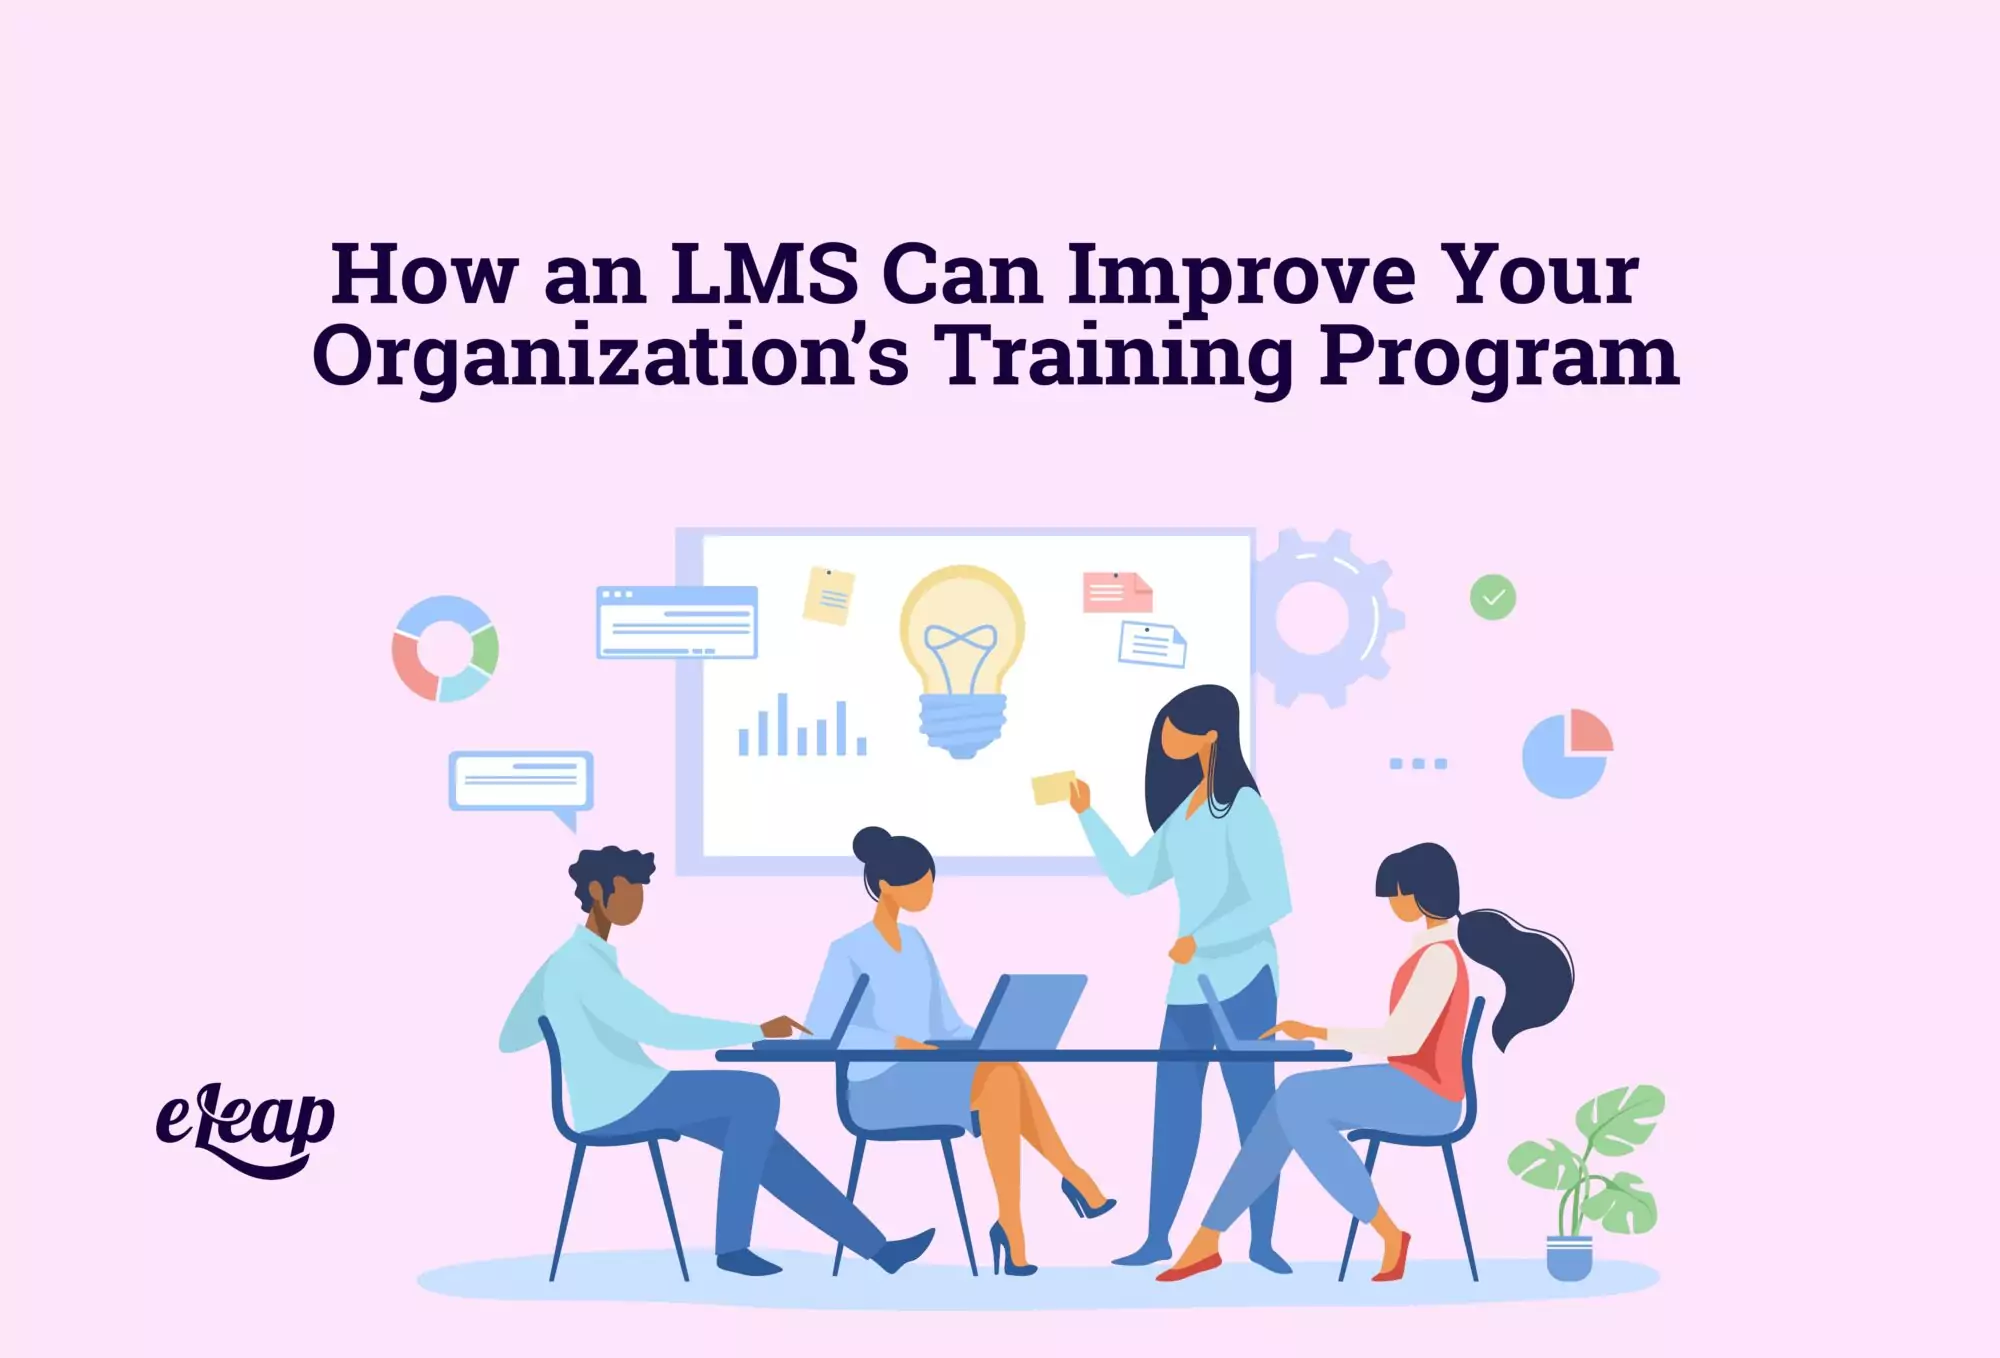 How an LMS Can Improve Your Organization’s Training Program